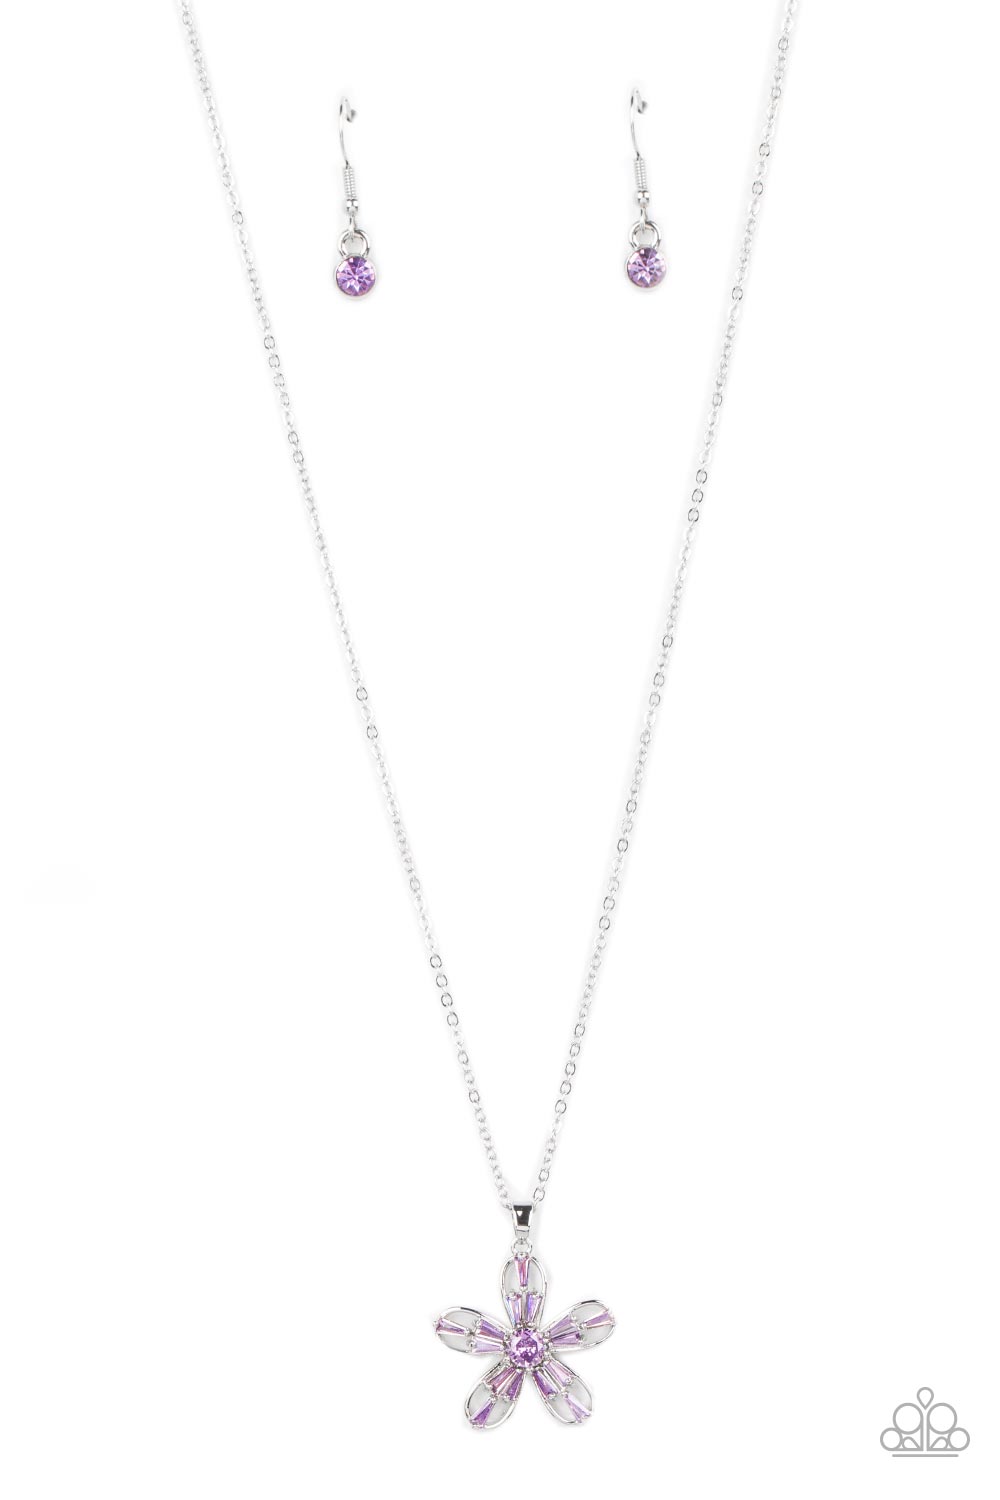 Botanical Ballad Paparazzi Accessories Necklace with Earrings - Purple